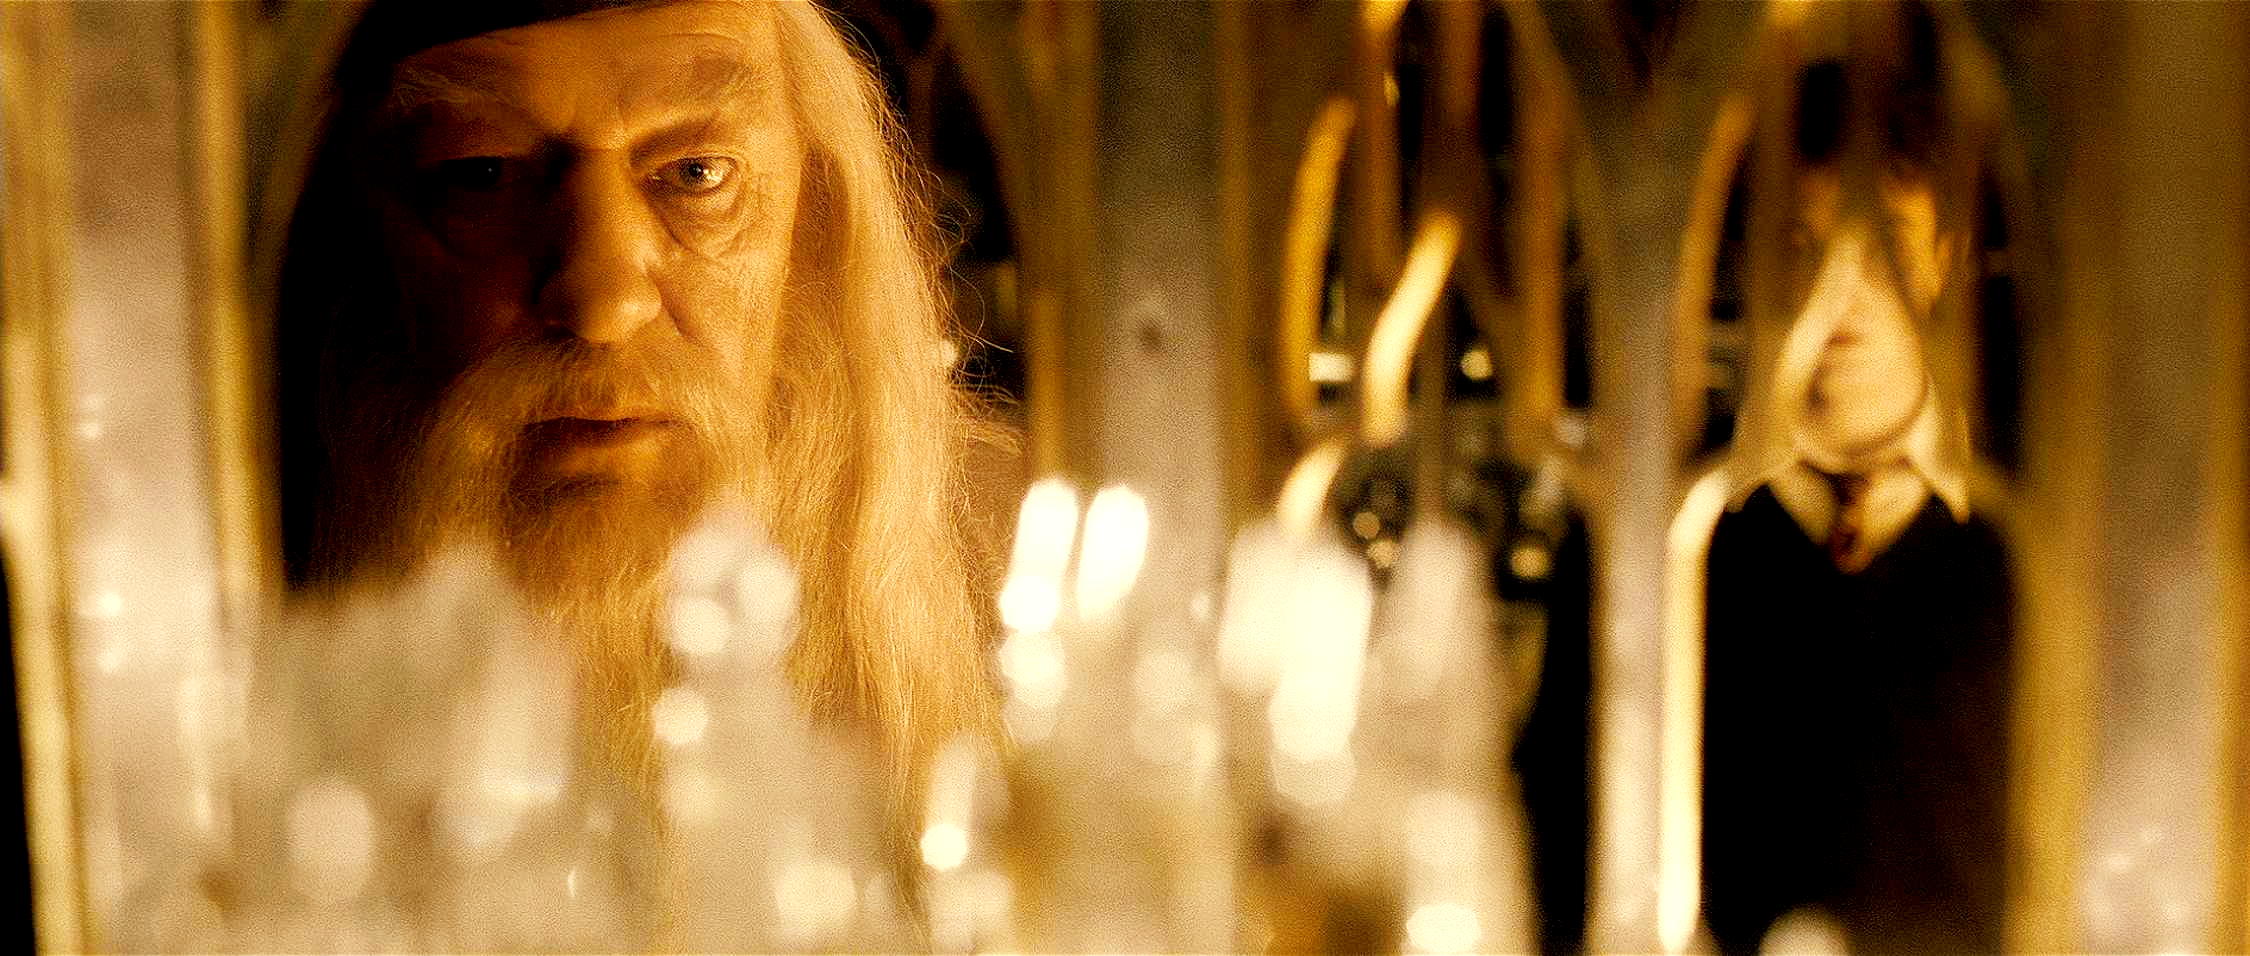 Michael Gambon stars as Albus Dumbledore  and Daniel Radcliffe stars as Harry Potter in Warner Bros Pictures' Harry Potter and the Half-Blood Prince (2009)